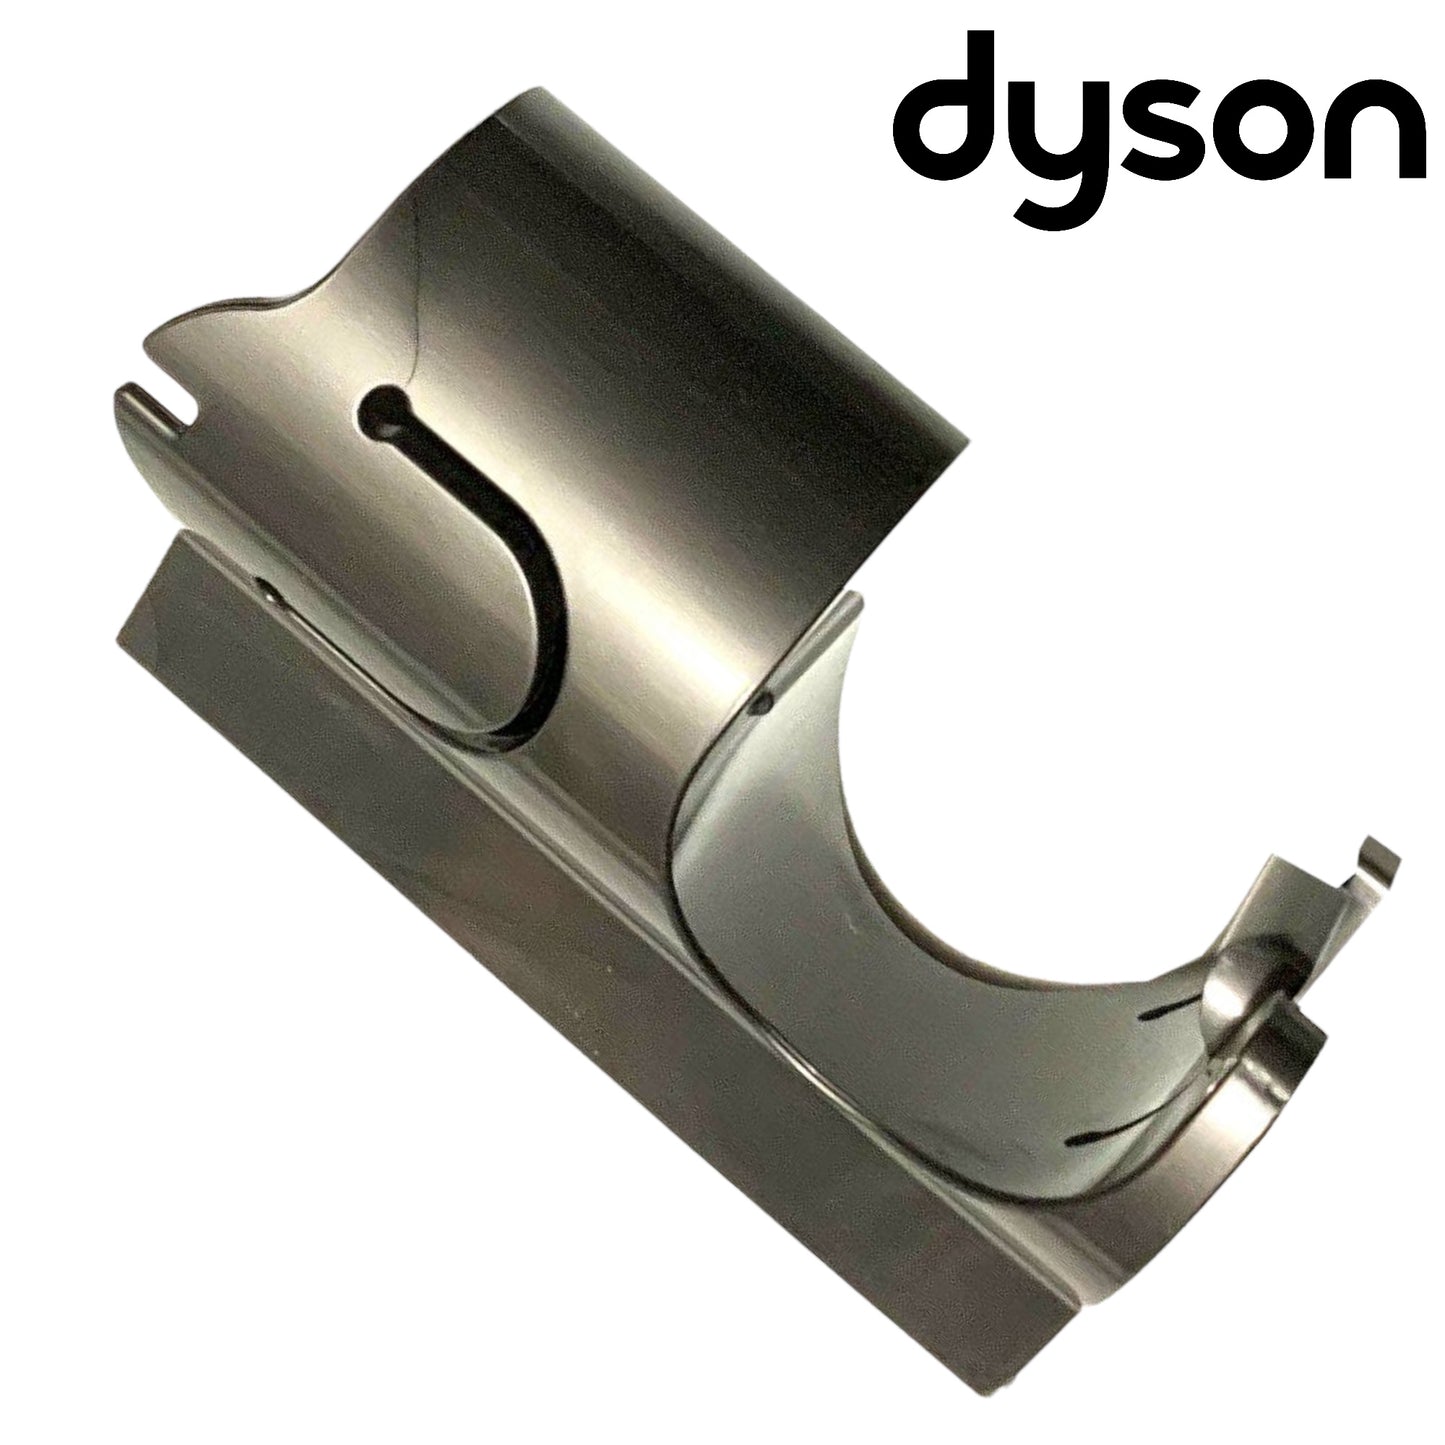 NEW OEM Dyson DC65 DC66 UP13 UP14 Attachment Accessory Tool Holder - 920595-01